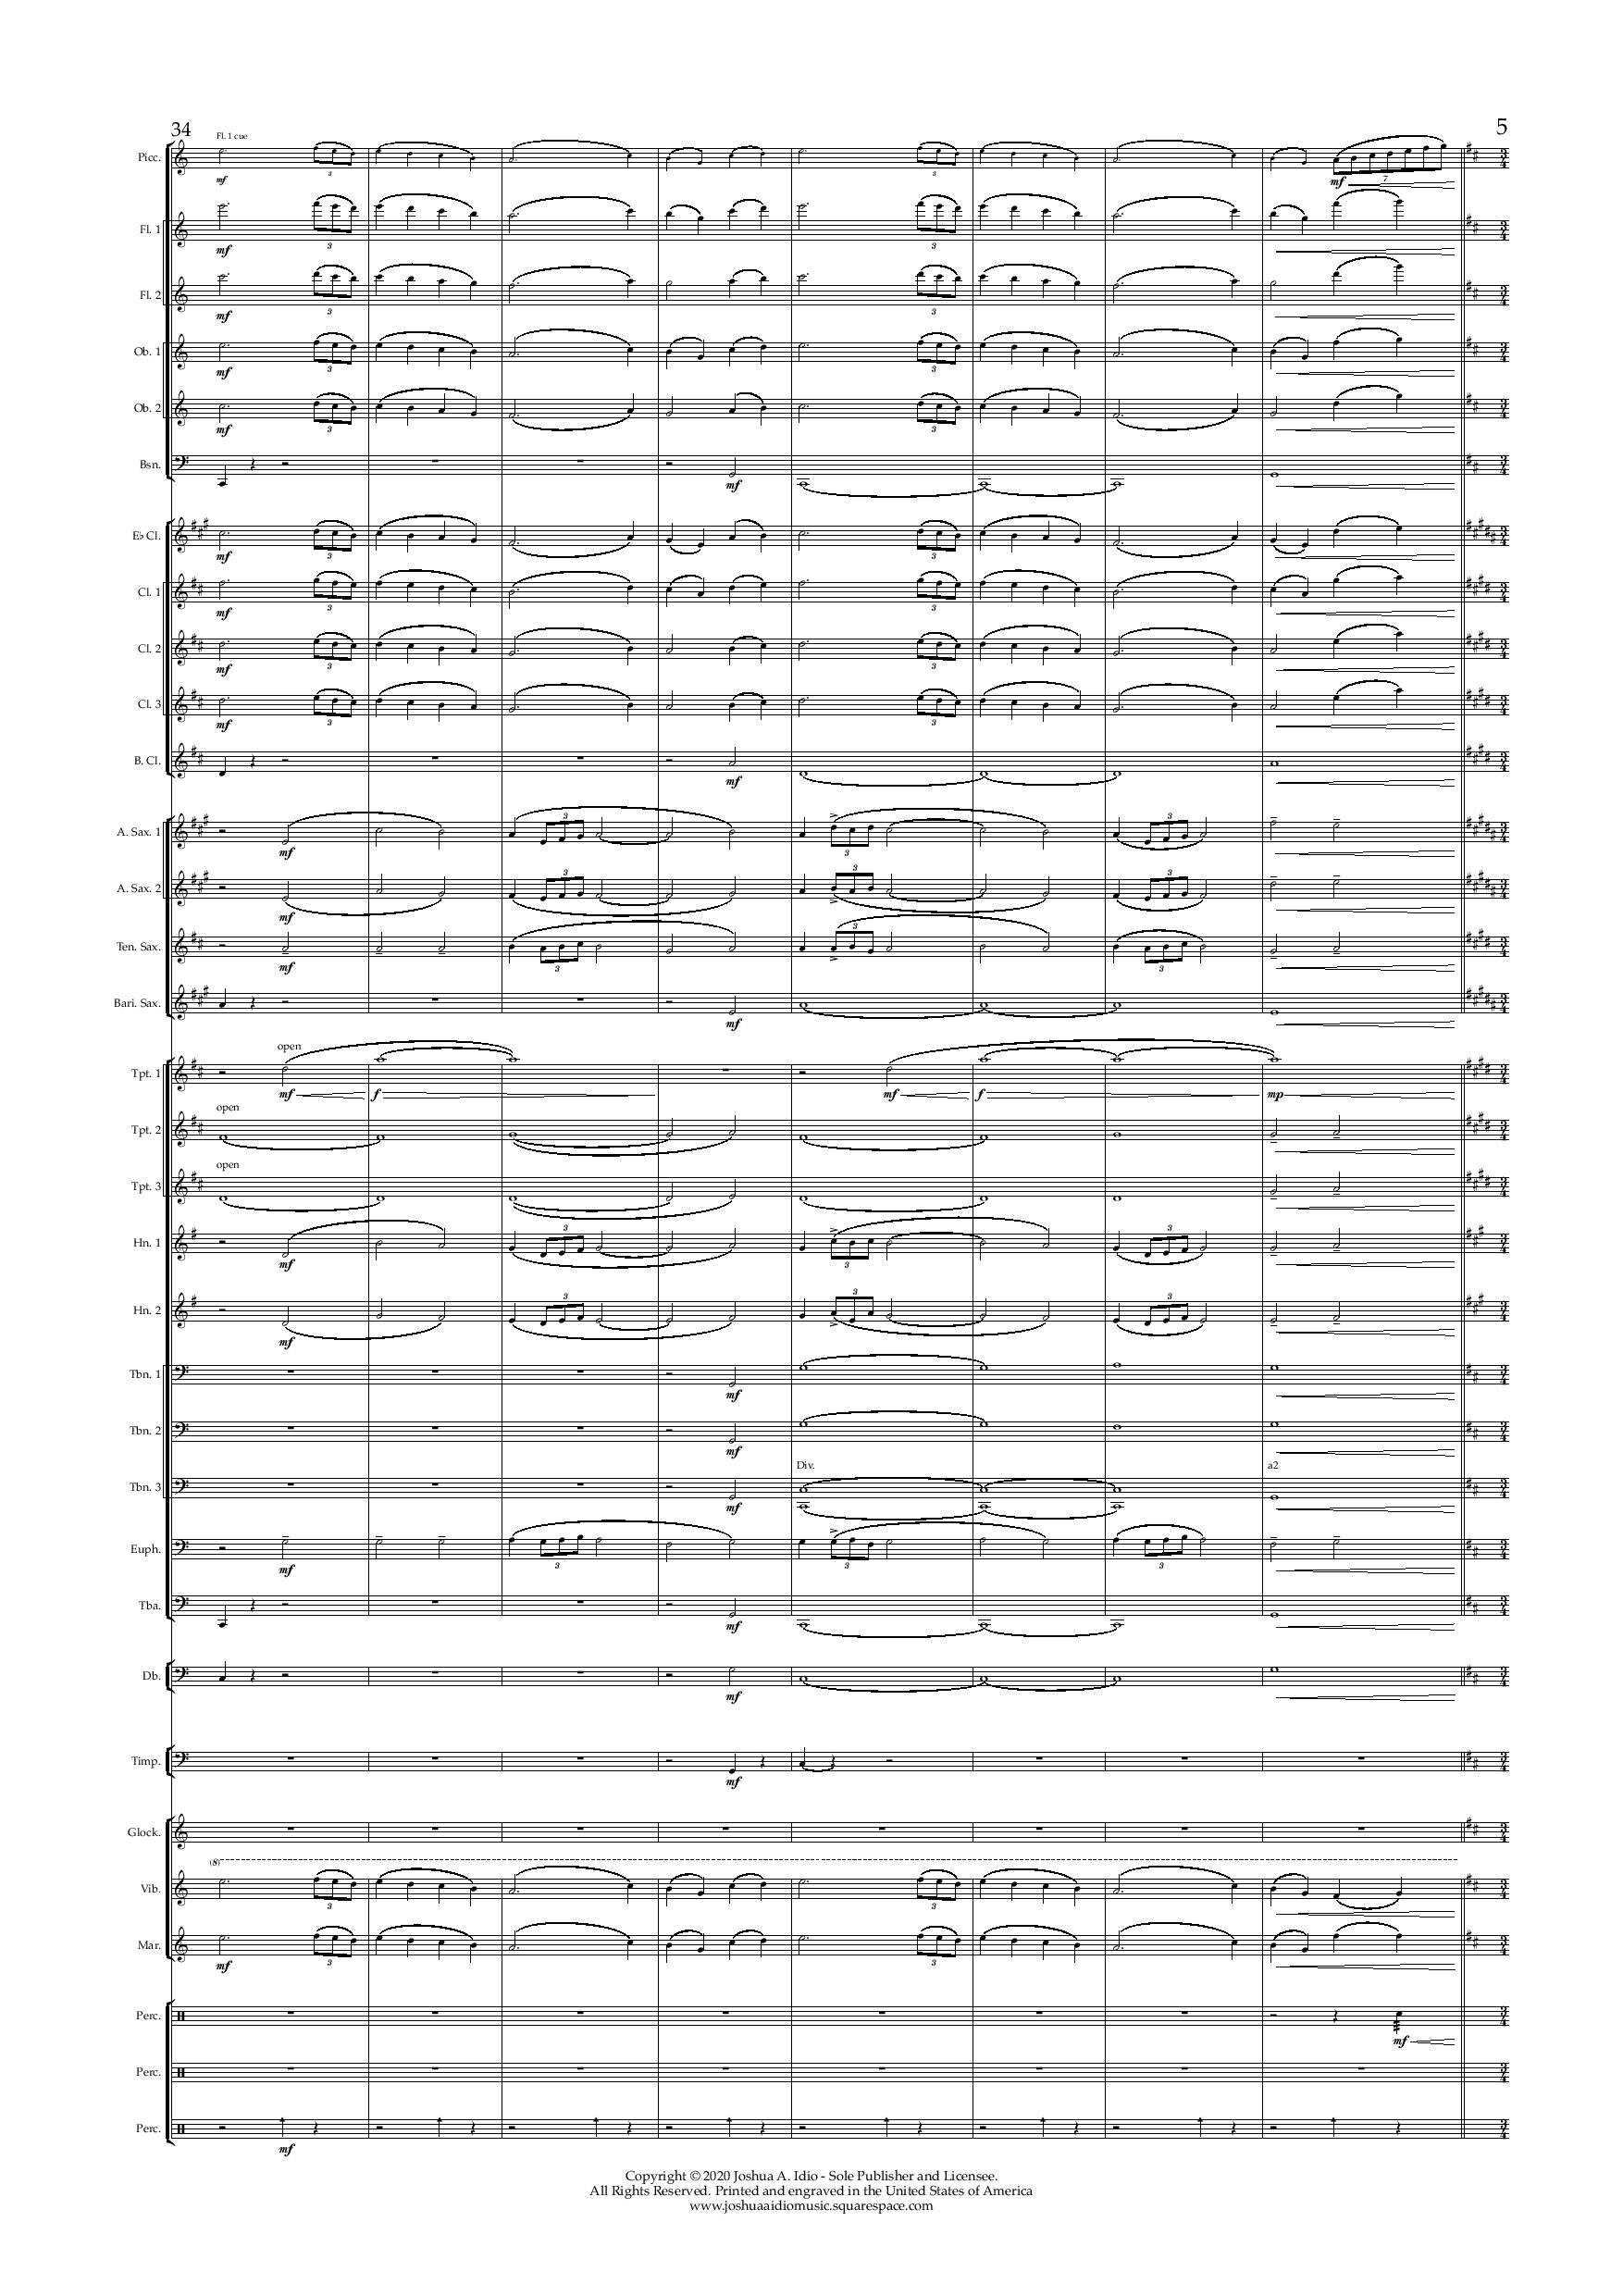 The Cruise Line Dream - Conductor s Score-page-005.jpg